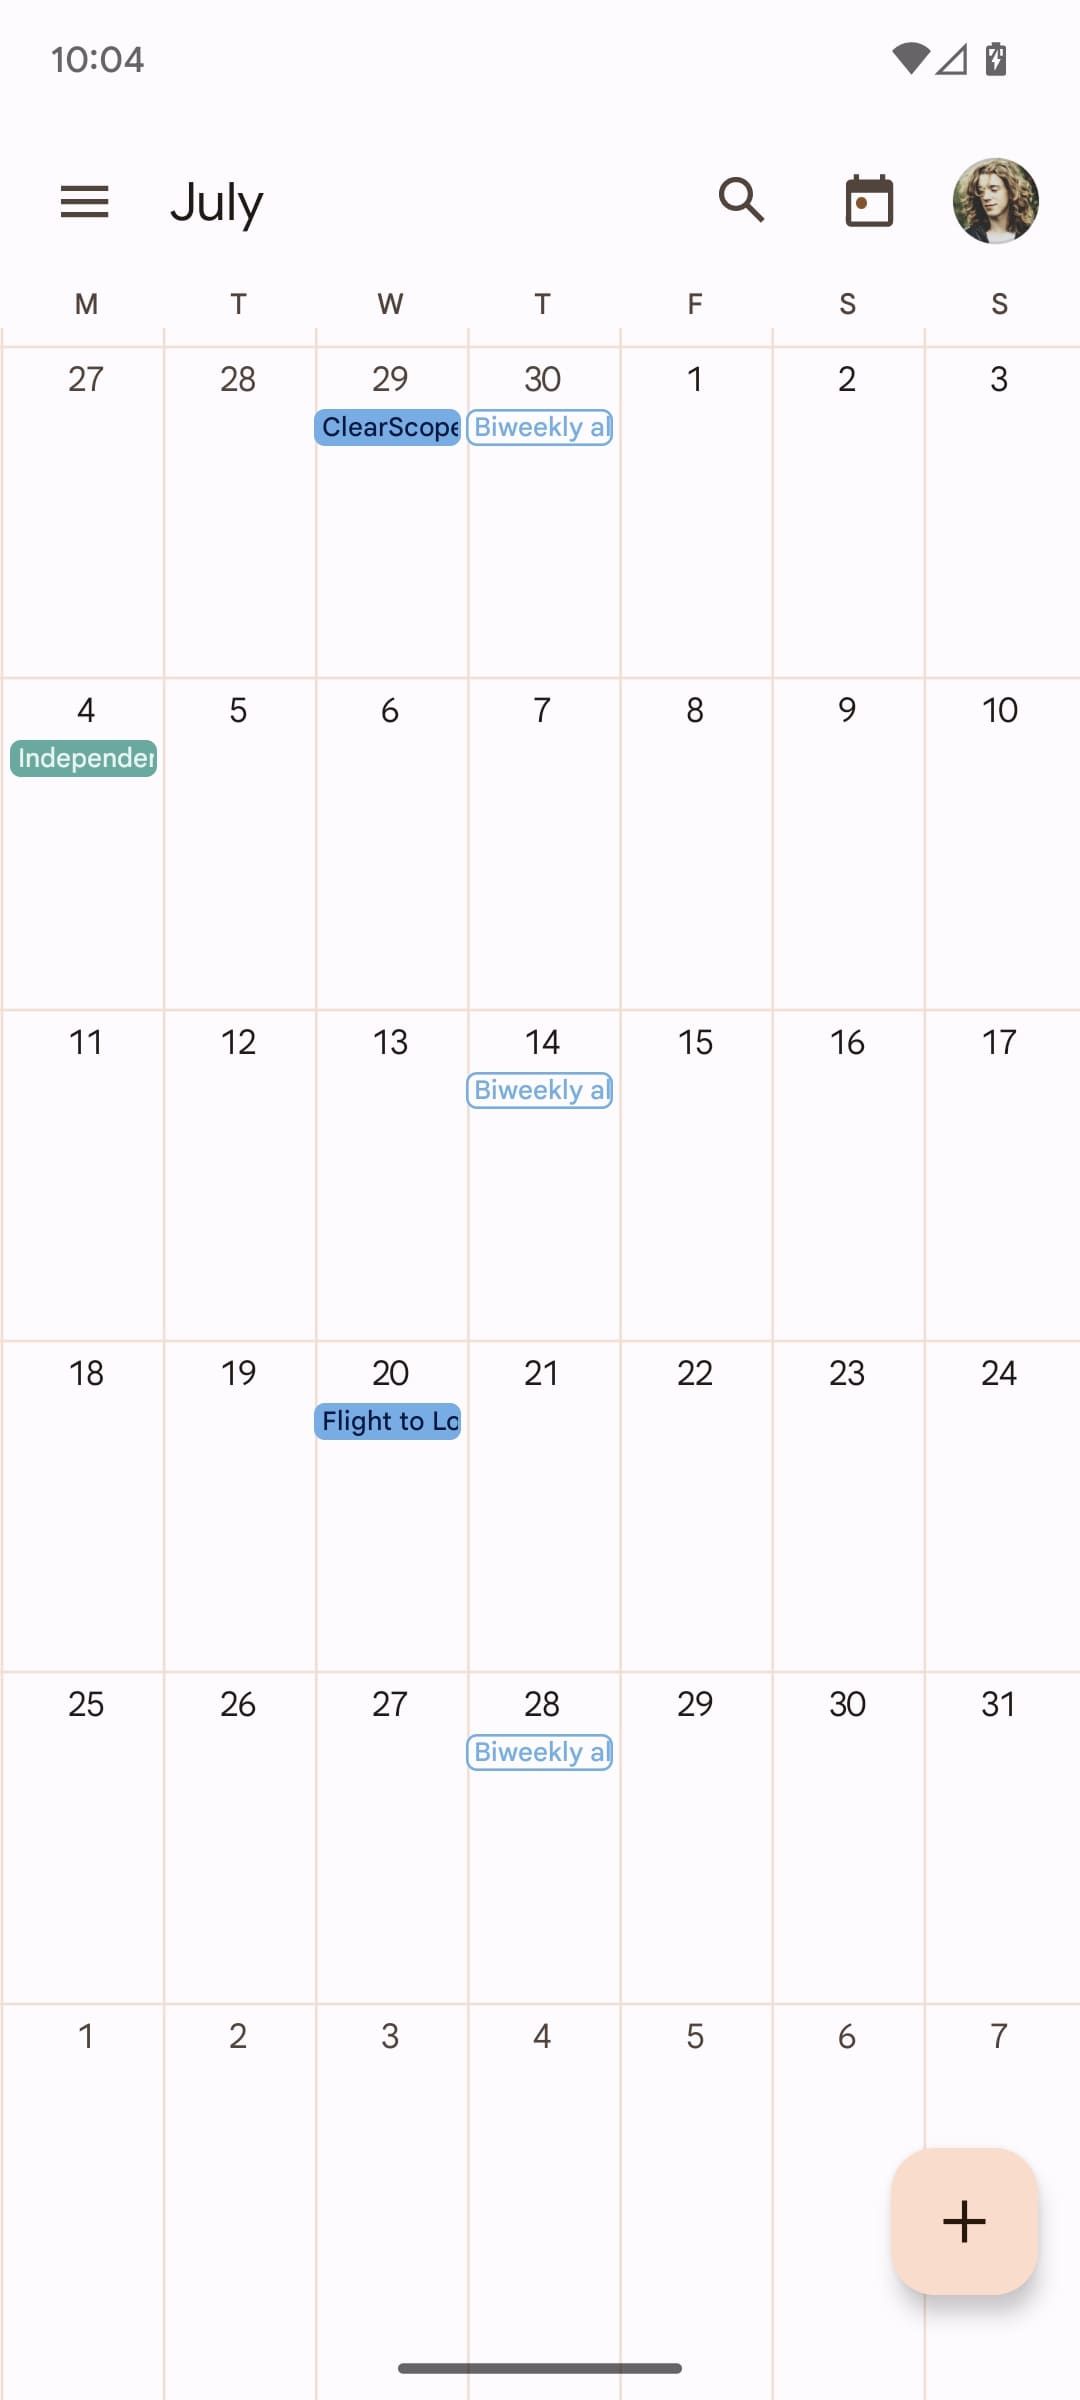 View all of your events on the calander homescreen.